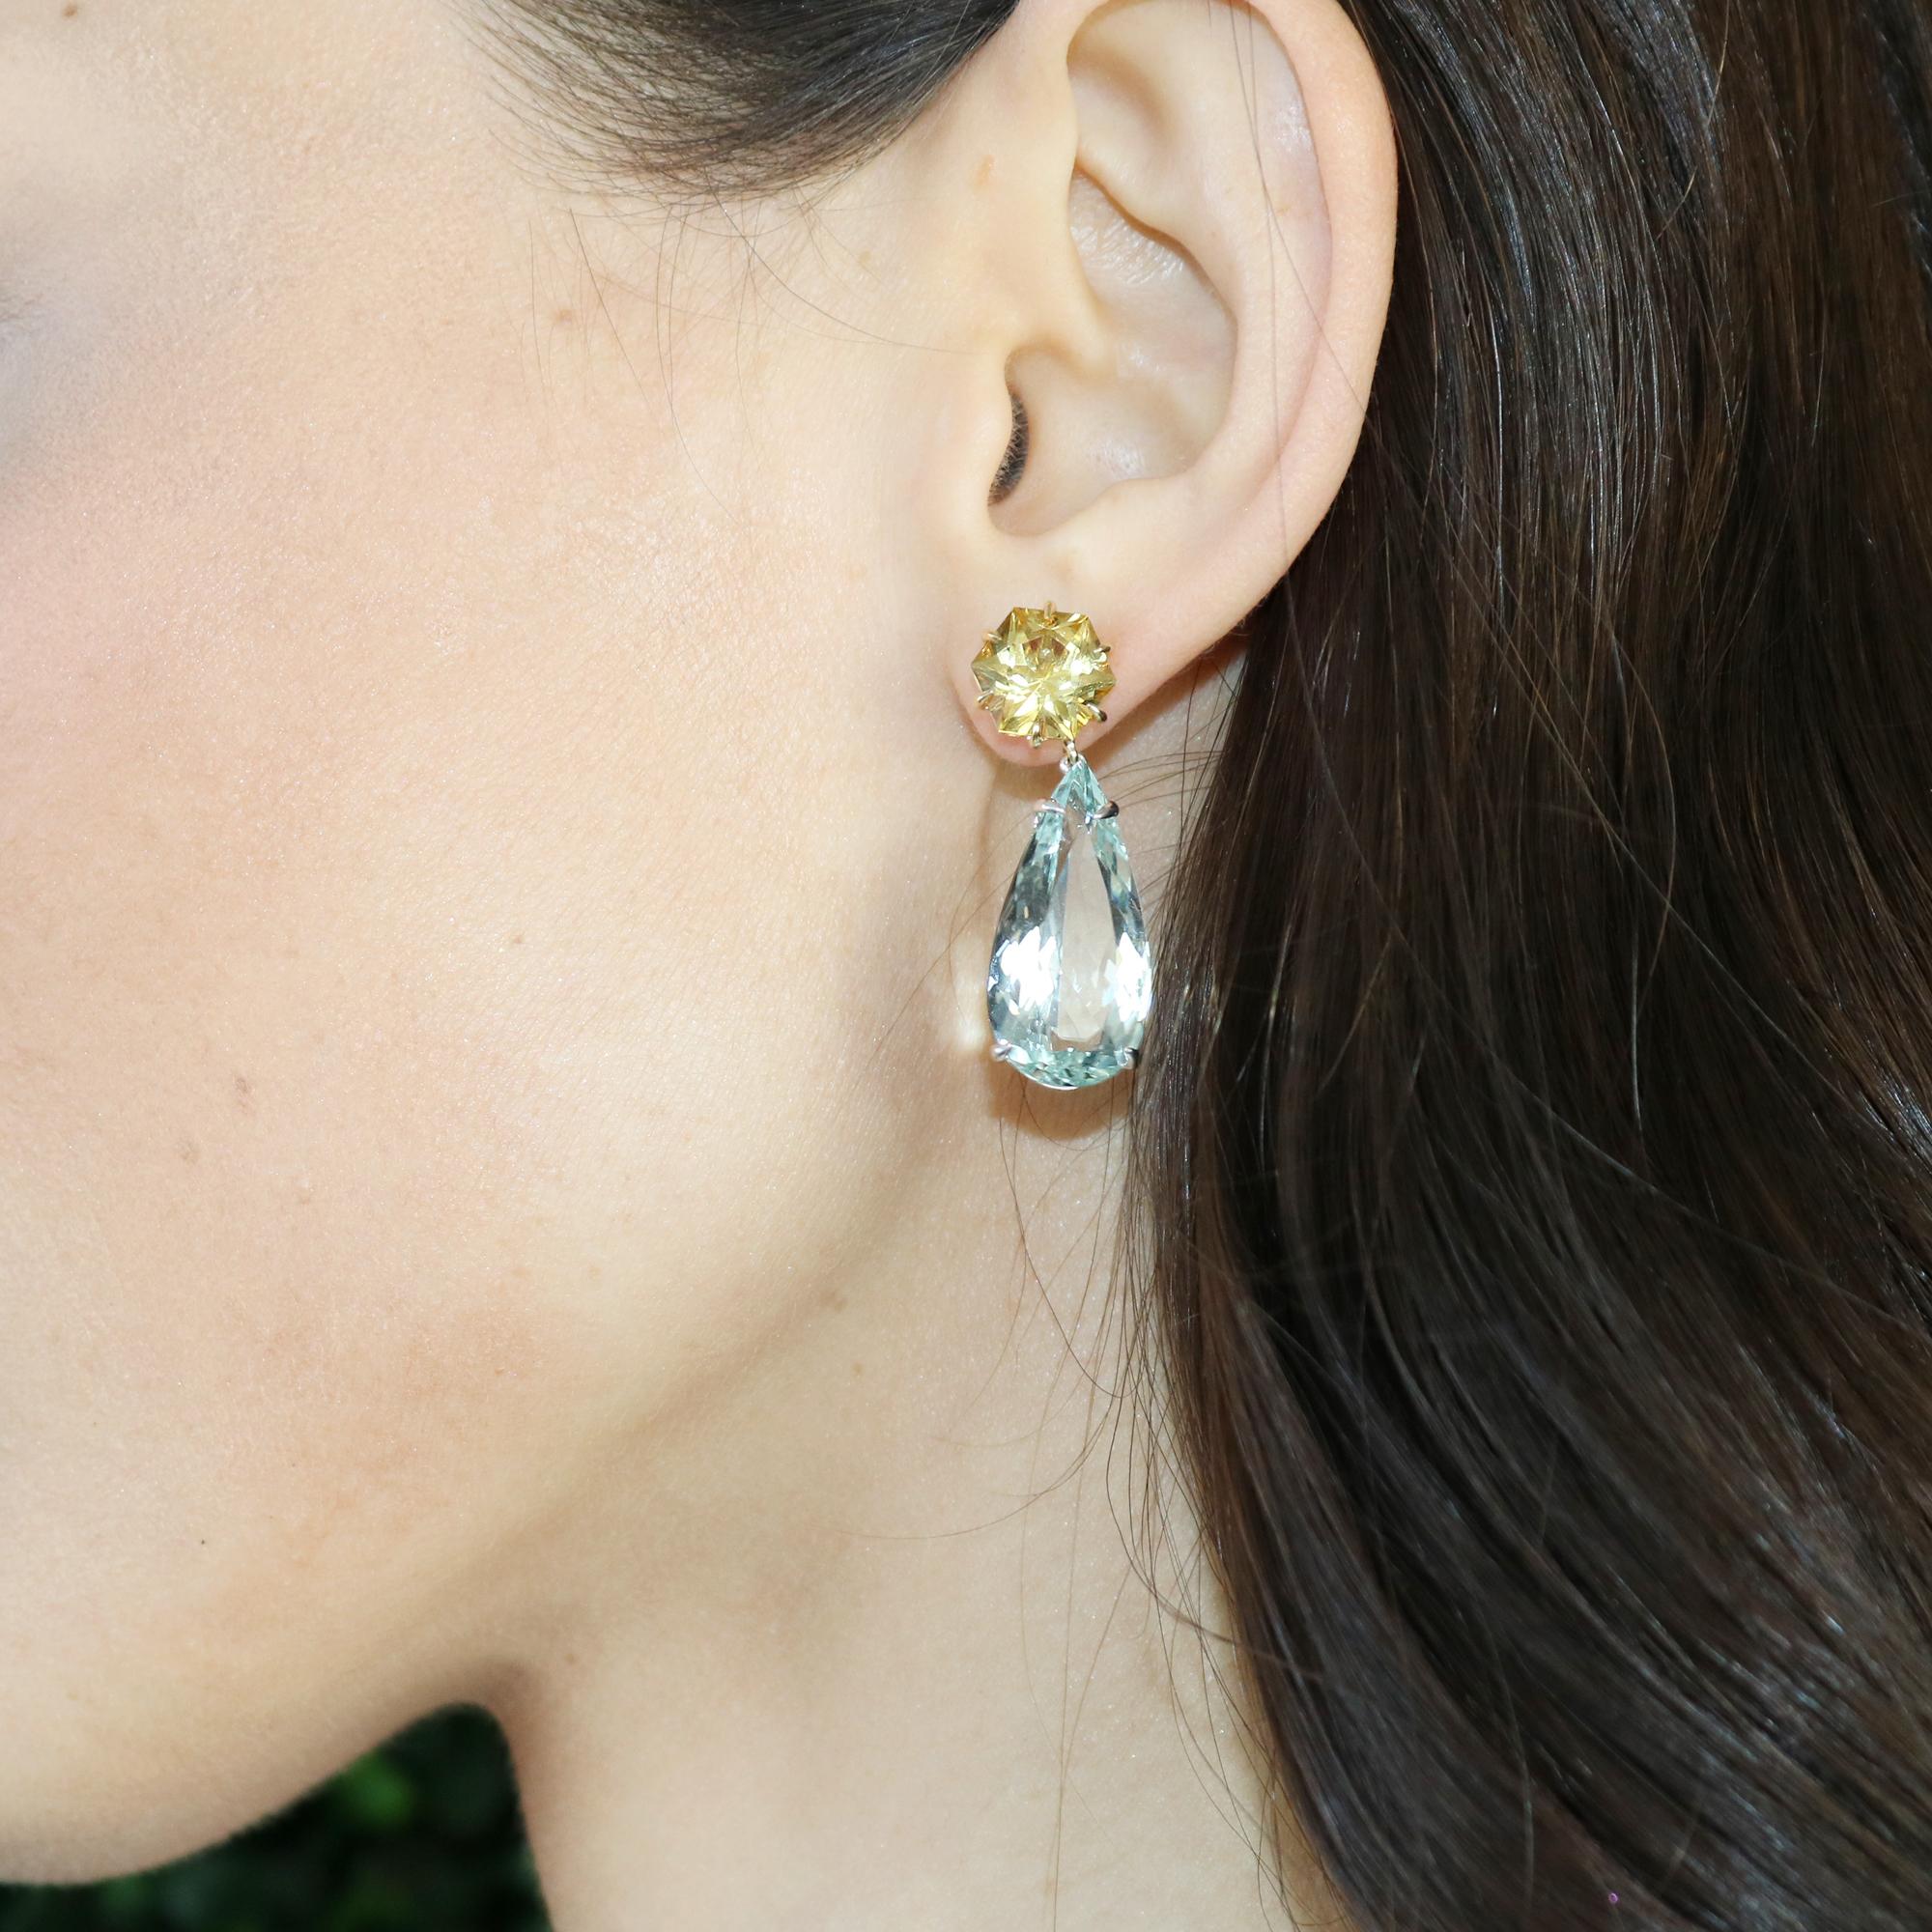 Contemporary 18 Karat White Gold Yellow Scapolite and Green Beryl Earrings